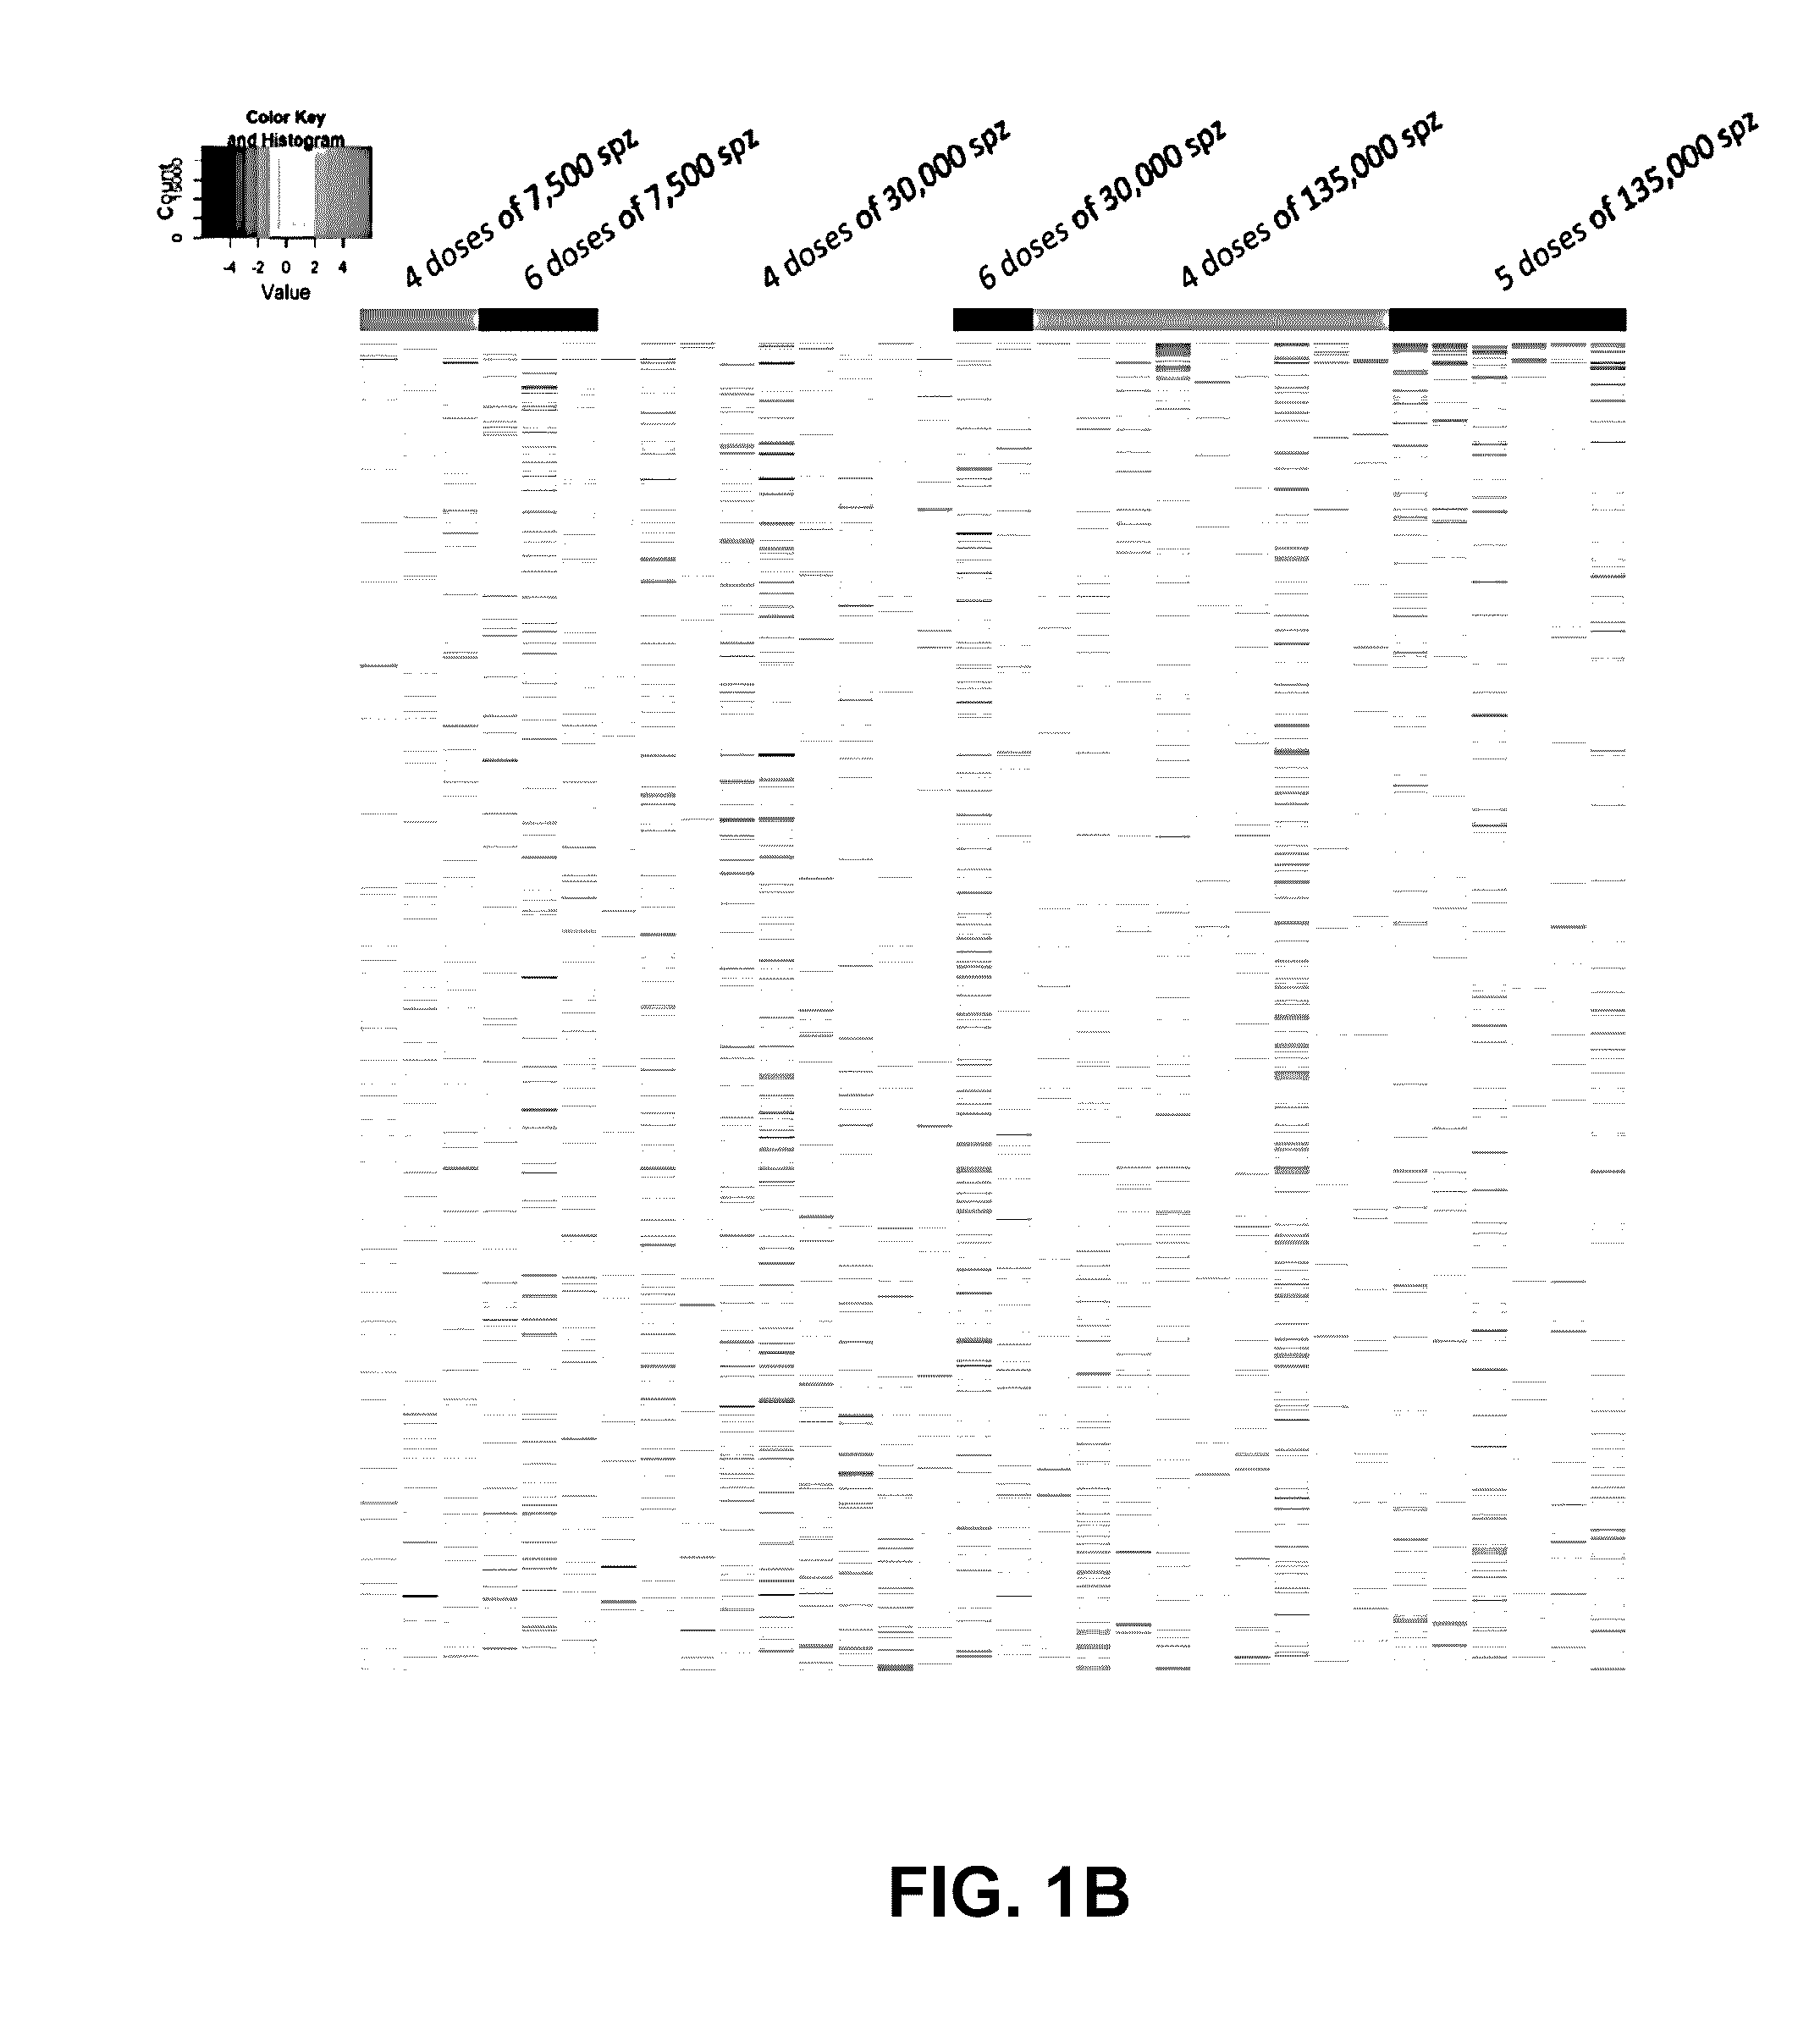 Serum antibody assay for determining protection from malaria, and pre-erythrocytic subunit vaccines